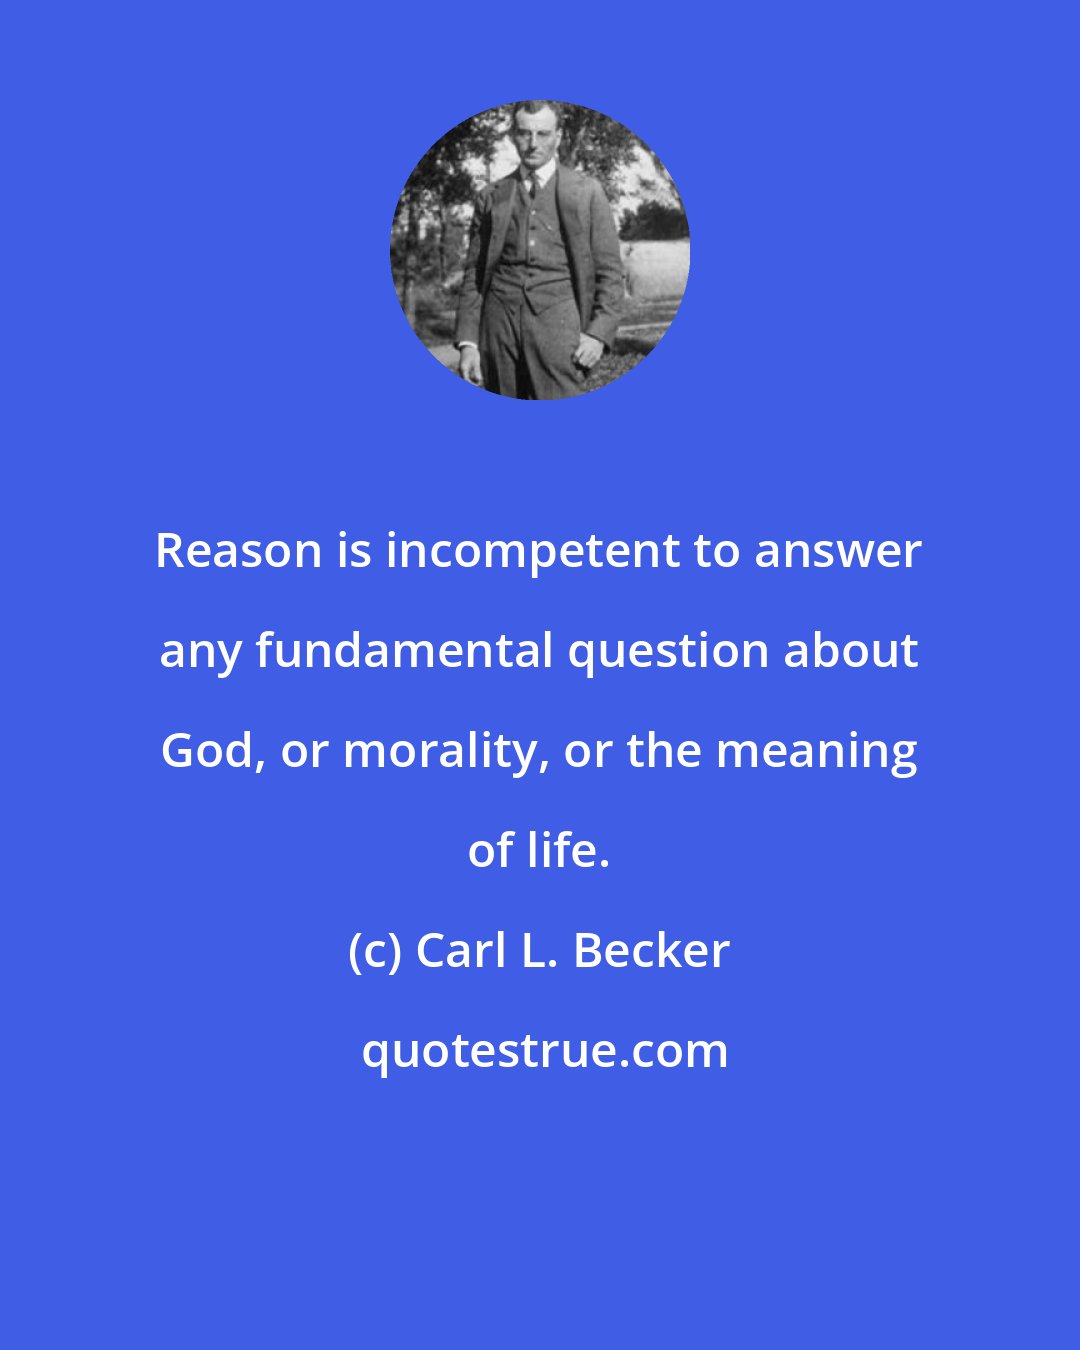 Carl L. Becker: Reason is incompetent to answer any fundamental question about God, or morality, or the meaning of life.